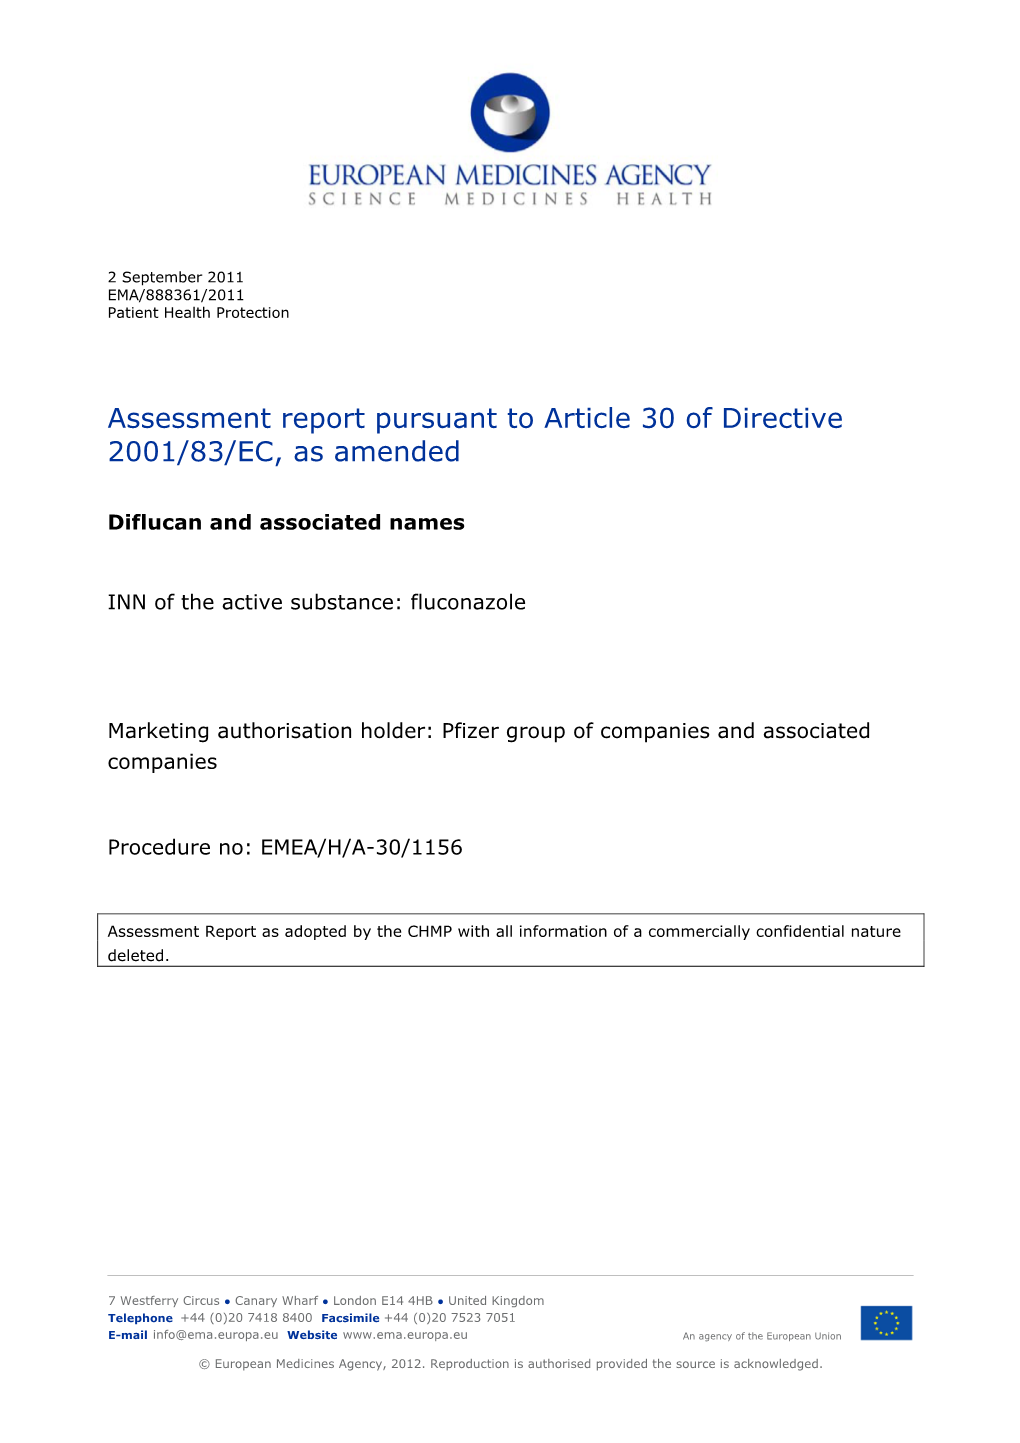 Assessment Report Pursuant to Article 30 of Directive 2001/83/EC, As Amended